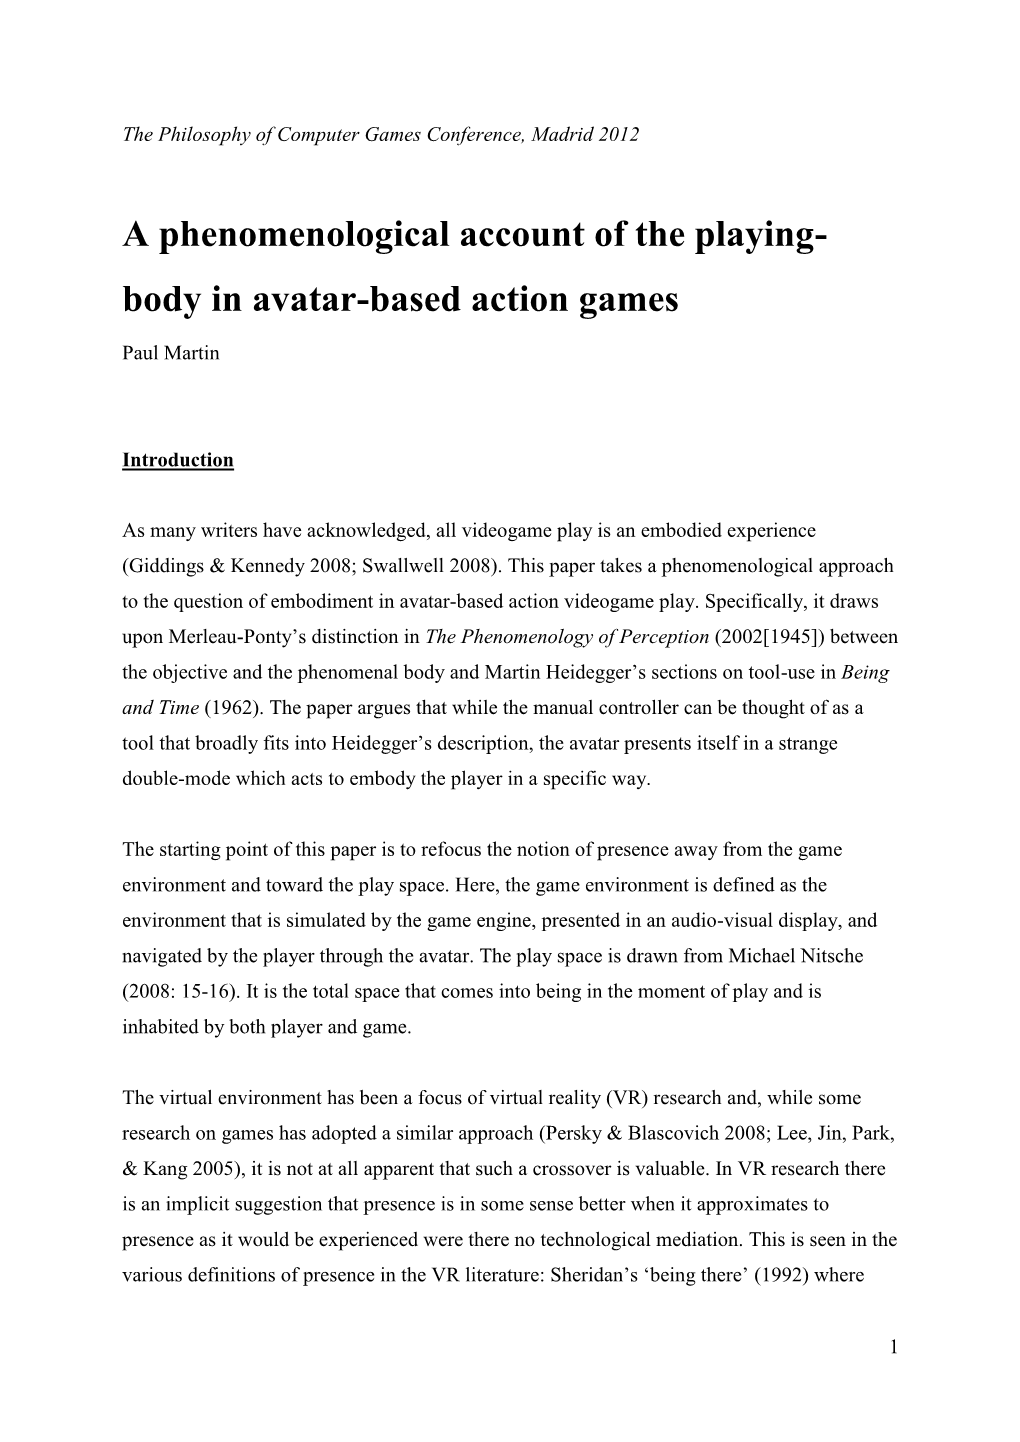 A Phenomenological Account of the Playing- Body in Avatar-Based Action Games